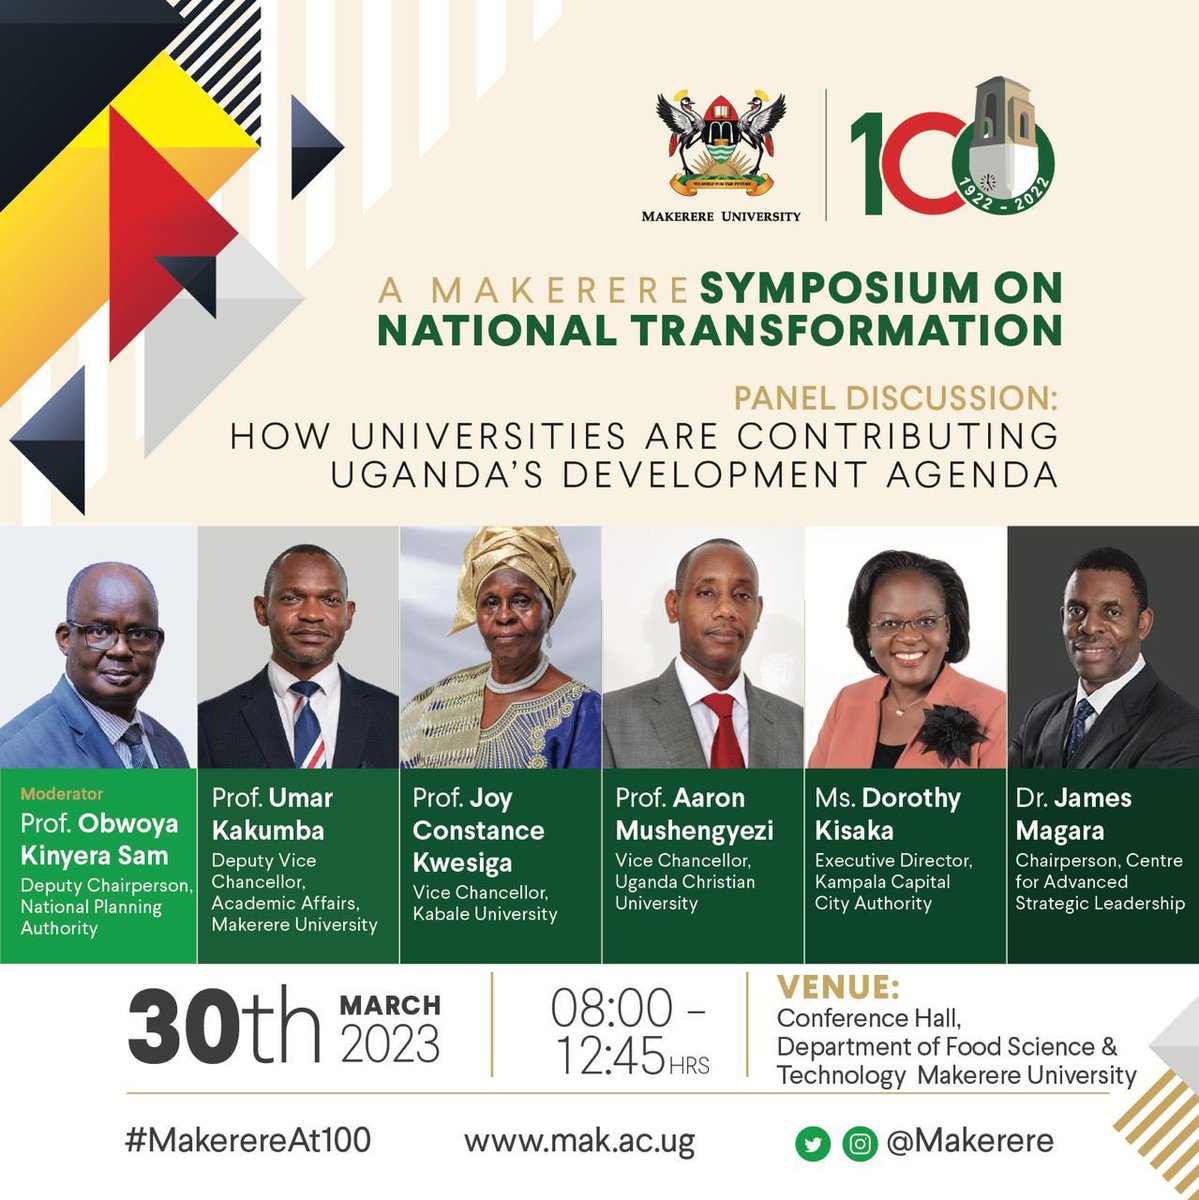 @Makerere organized a symposium on National Transformation due on 30th March covering the Role of Universities in Responding to Africa’s Problems and Development needs. 

Time: 8:00-12:45hrs. Y’all are most welcome. #MakerereAt100 @ProfNawangwe @MoICT_Ug @azawedde @MosesWatasa